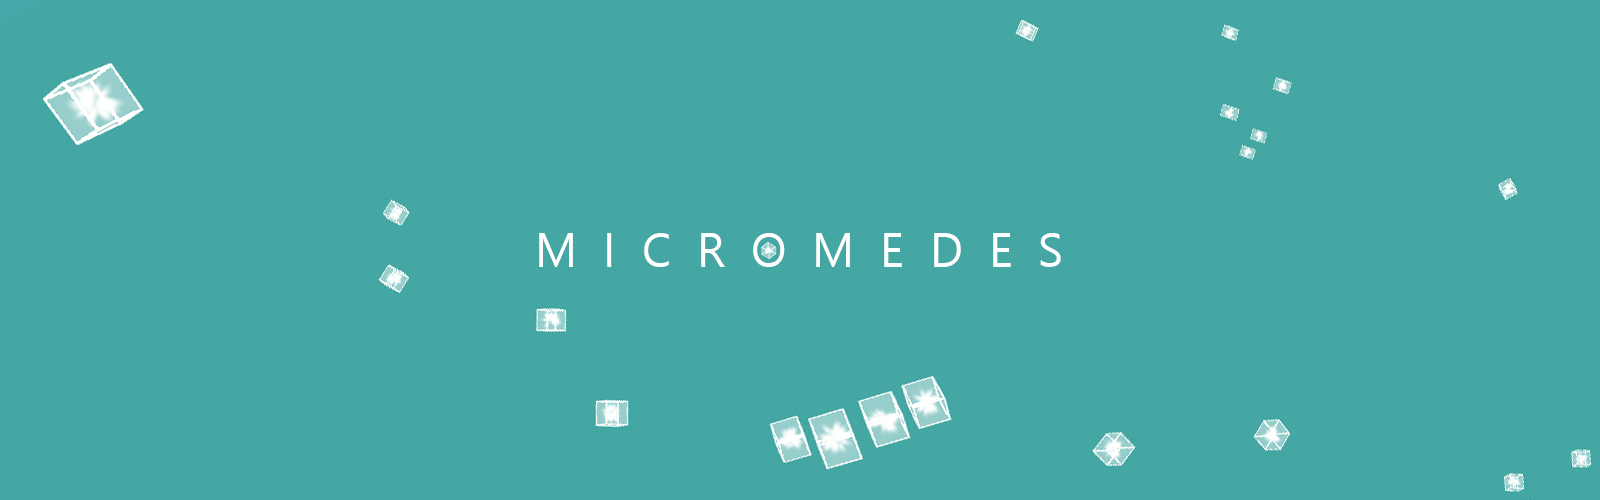 Micromedes